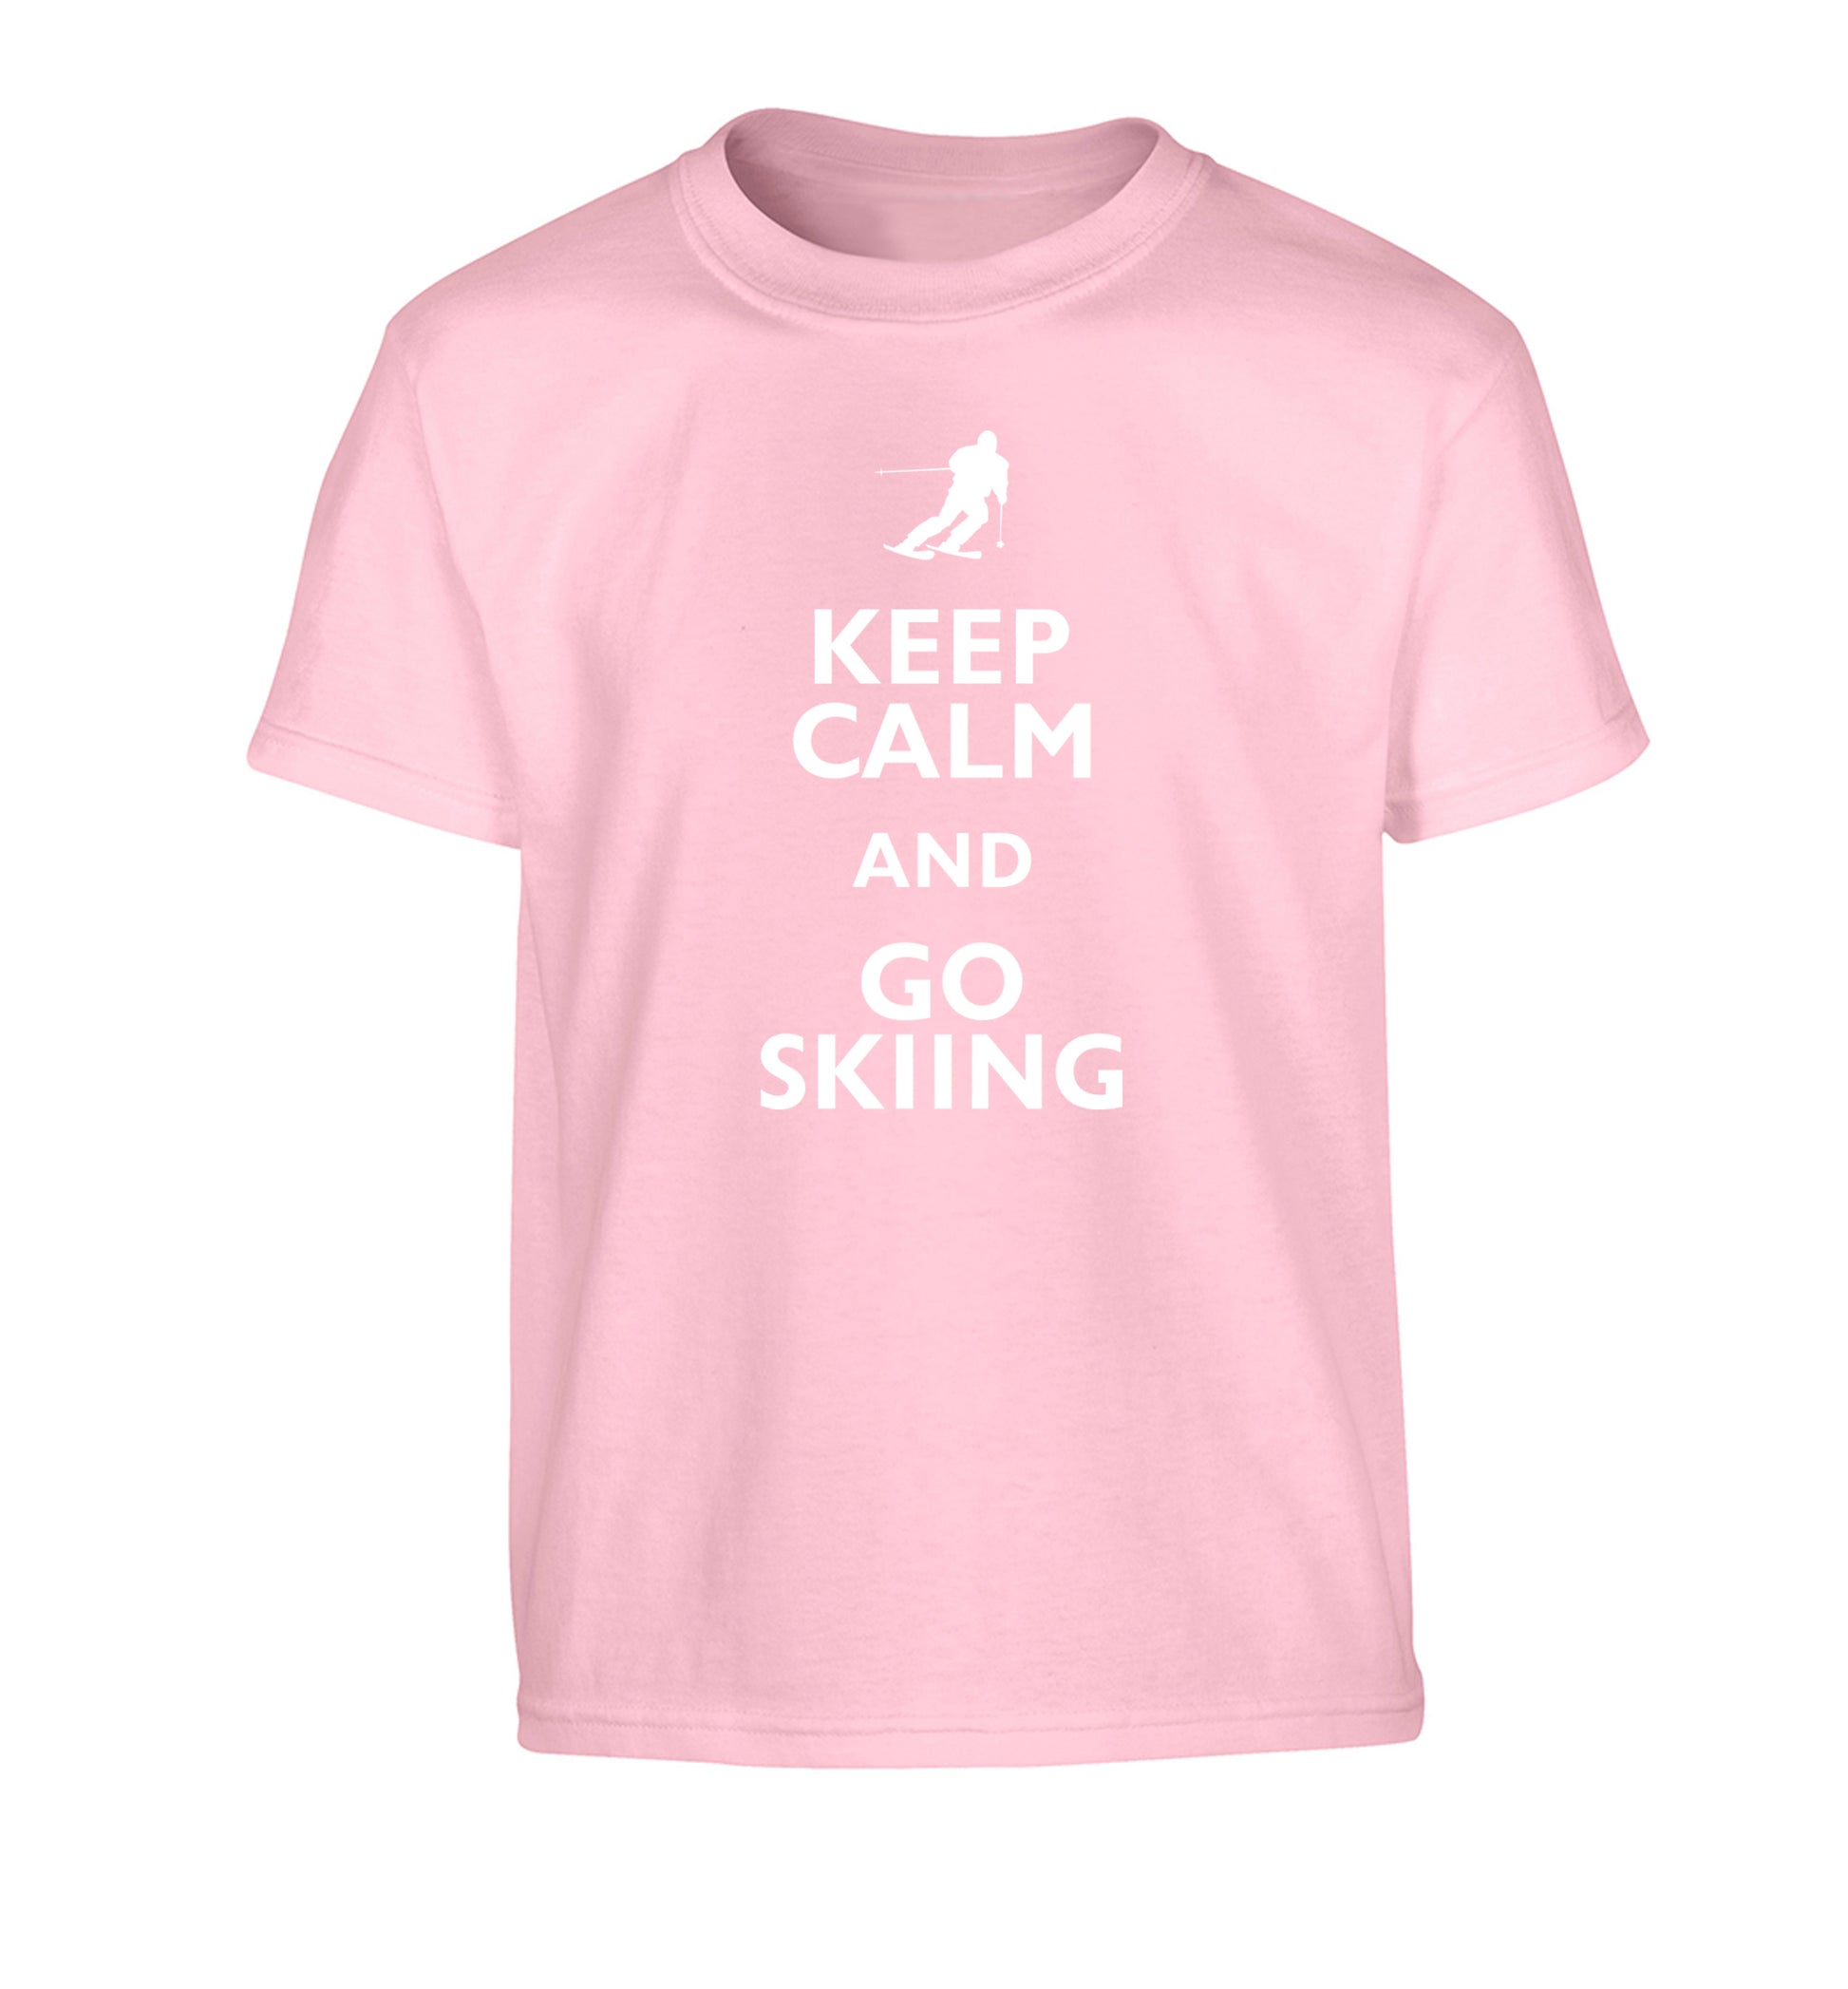 Keep calm and go skiing Children's light pink Tshirt 12-14 Years